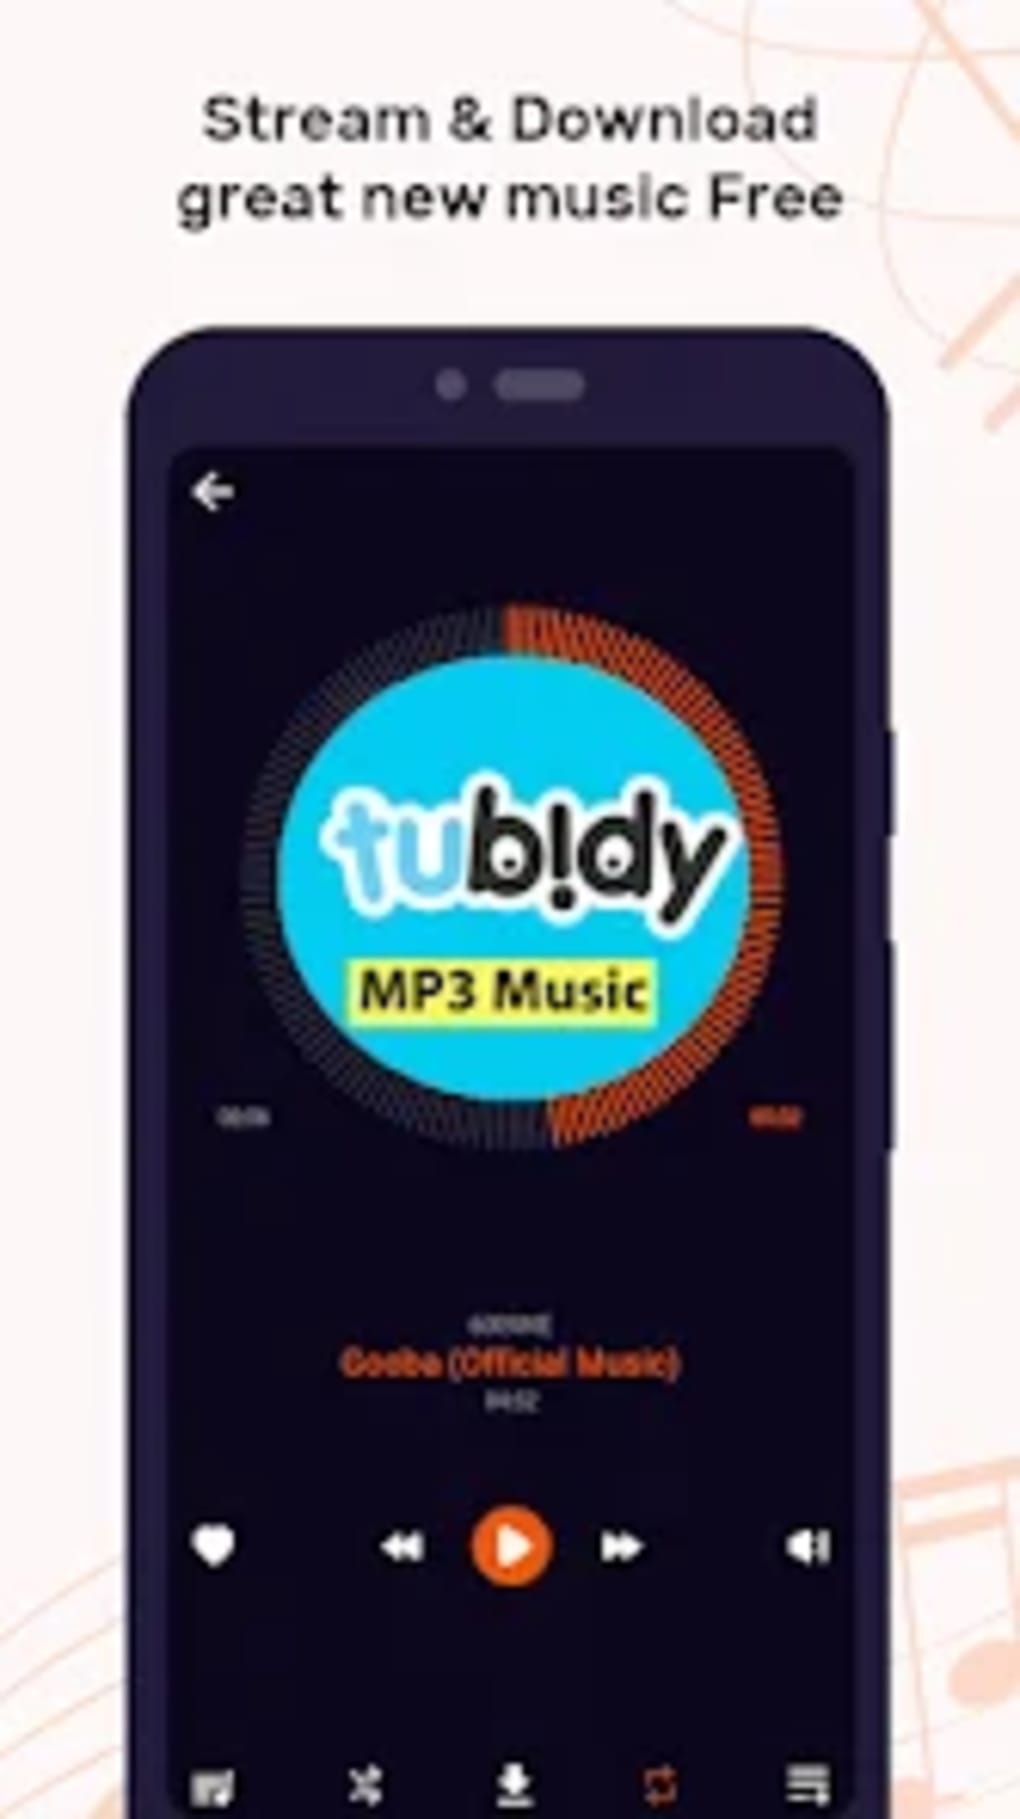 Tubidy MP3 Music Downloader pour Android Télécharger